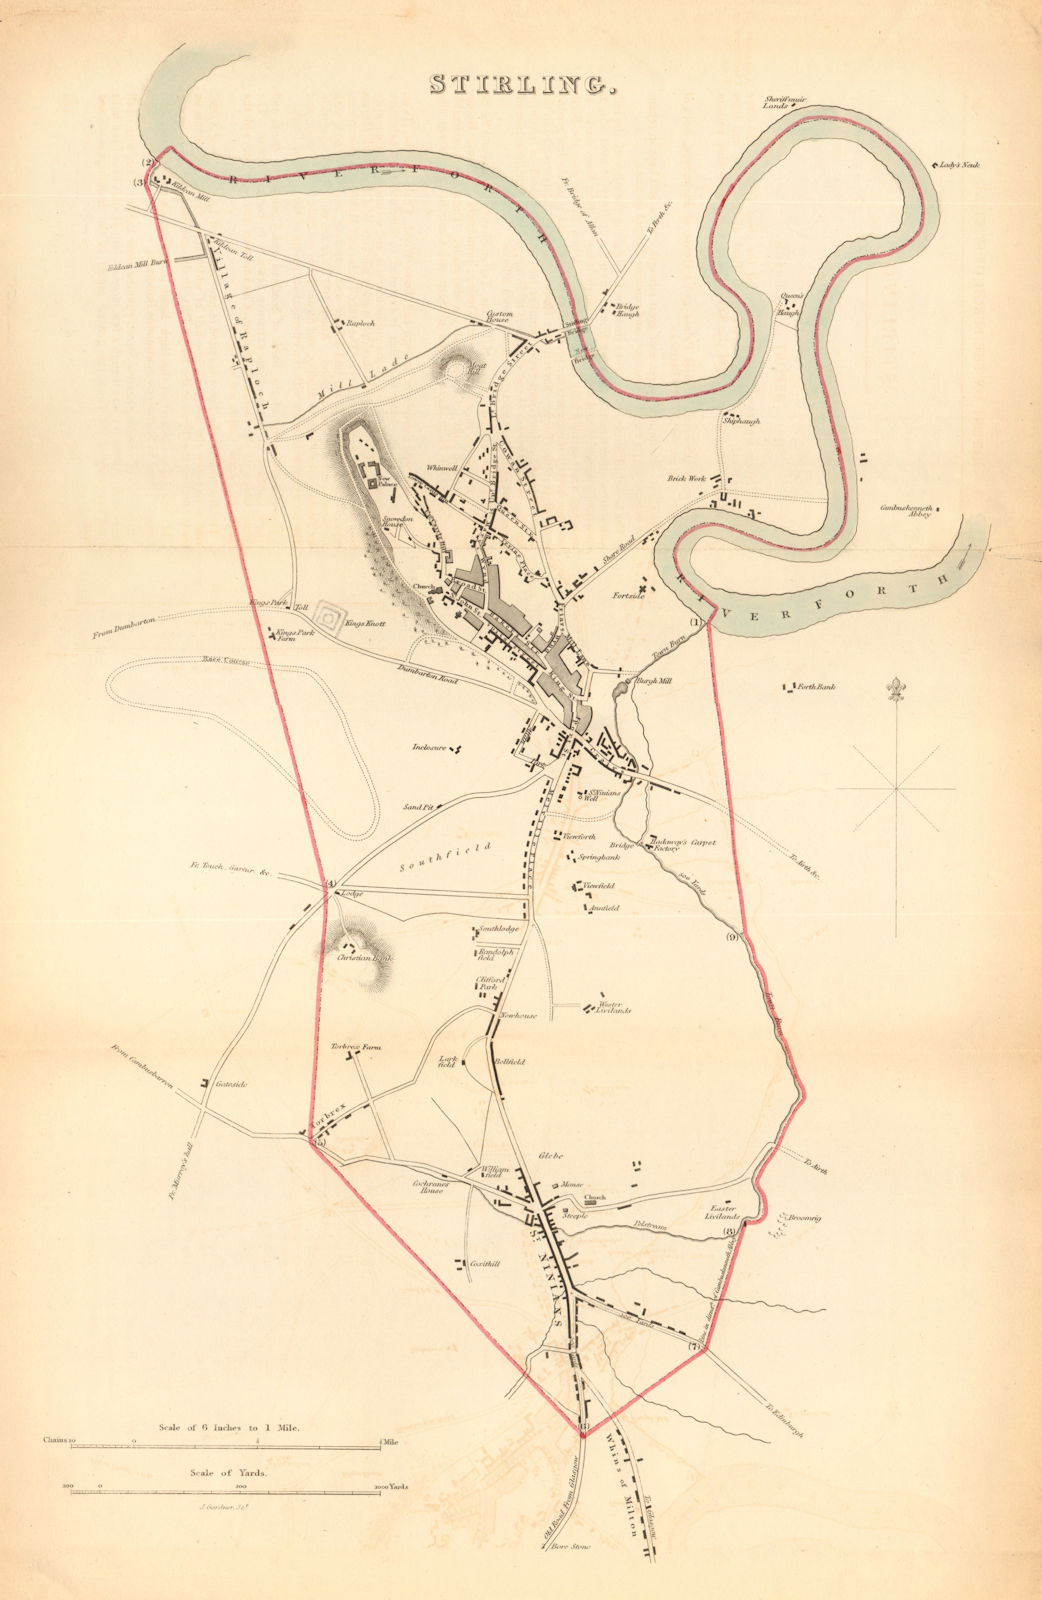 STIRLING borough/town plan for the REFORM ACT. St Ninians. Scotland 1832 map